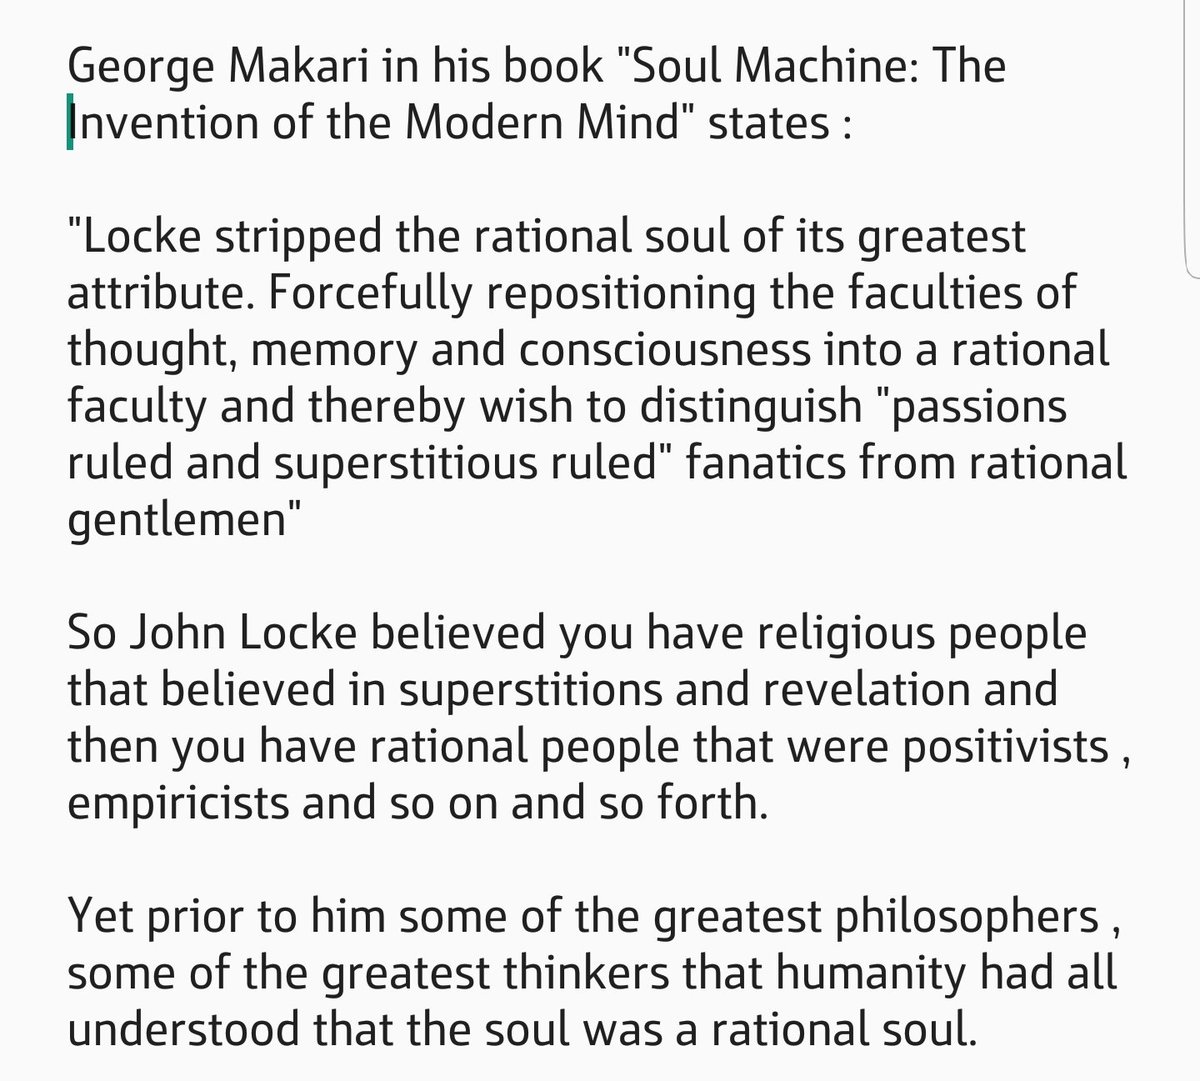 3) George Makari in his book "Soul Machine: The Invention of the Modern Mind" states :